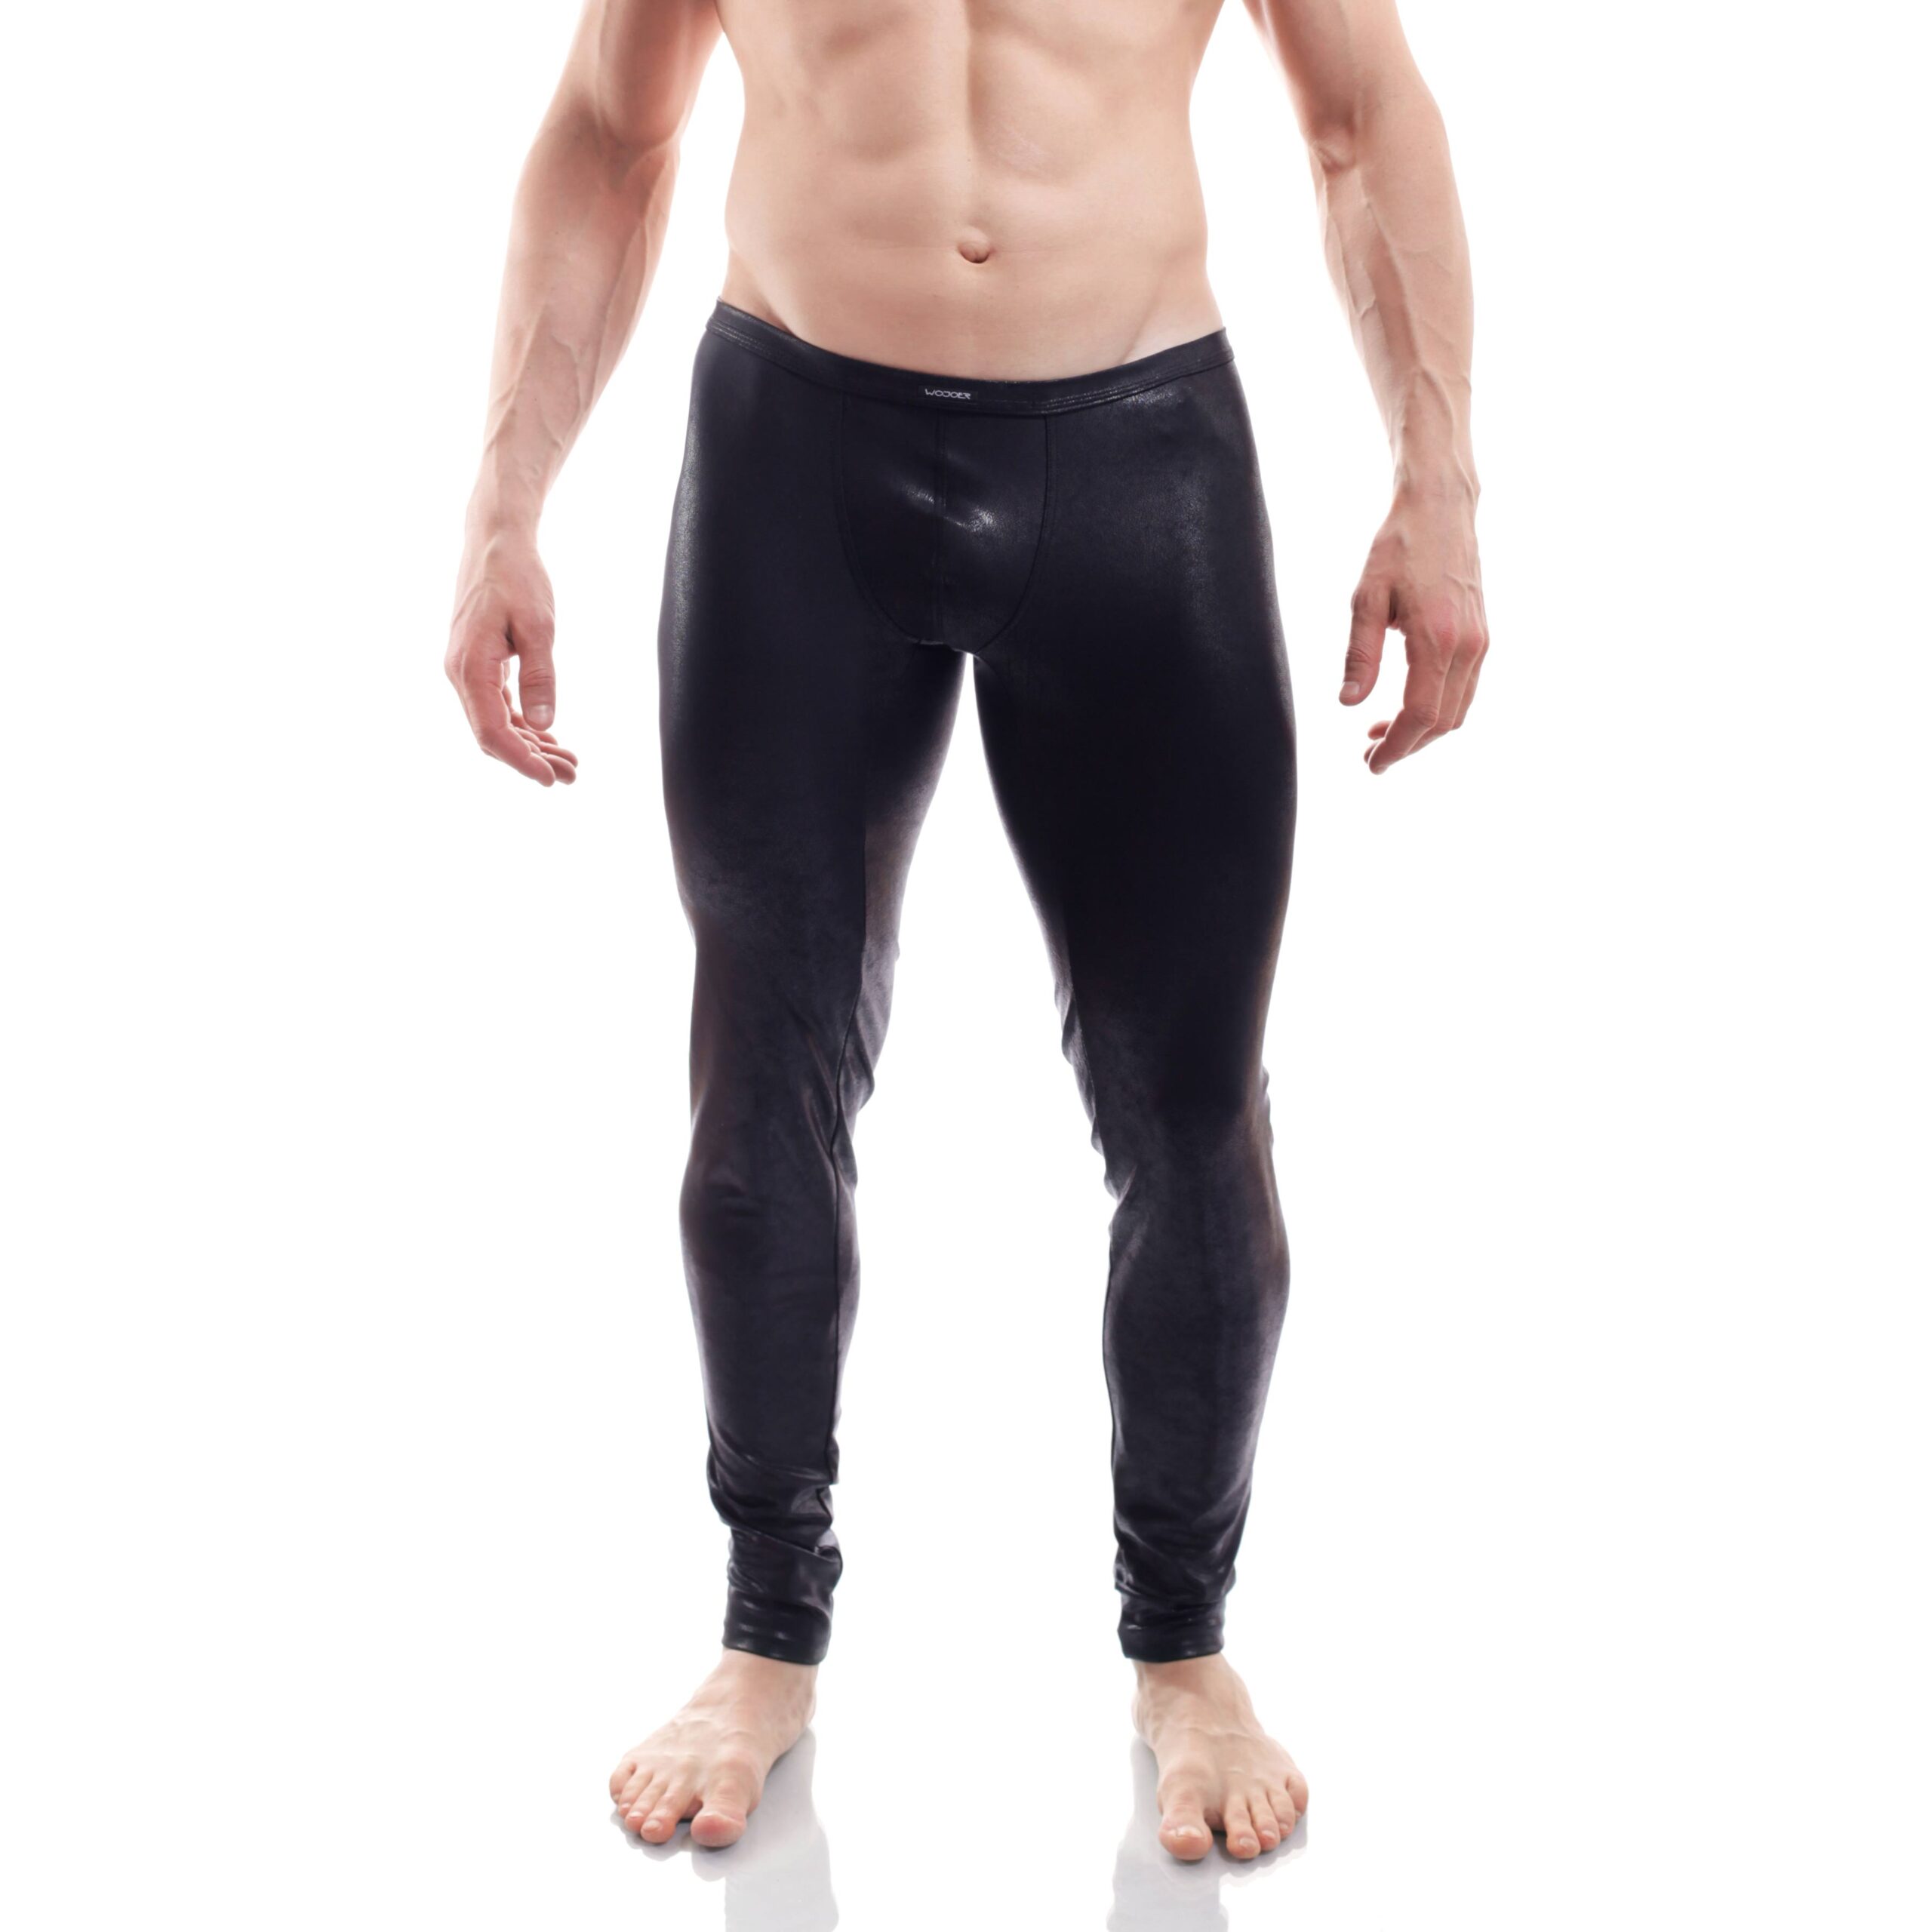 Production on order, because the black Black Shark Leggings 385W601.1 belongs in the category: Wojoer “LIVE products”!
Sizes
Available in sizes S, M, L, XL
Material composition
80% polyester 20% elastane
Particularities
LIVE product | matt glossy, slightly stretchy material | Leatherlike | suitable for swimming…